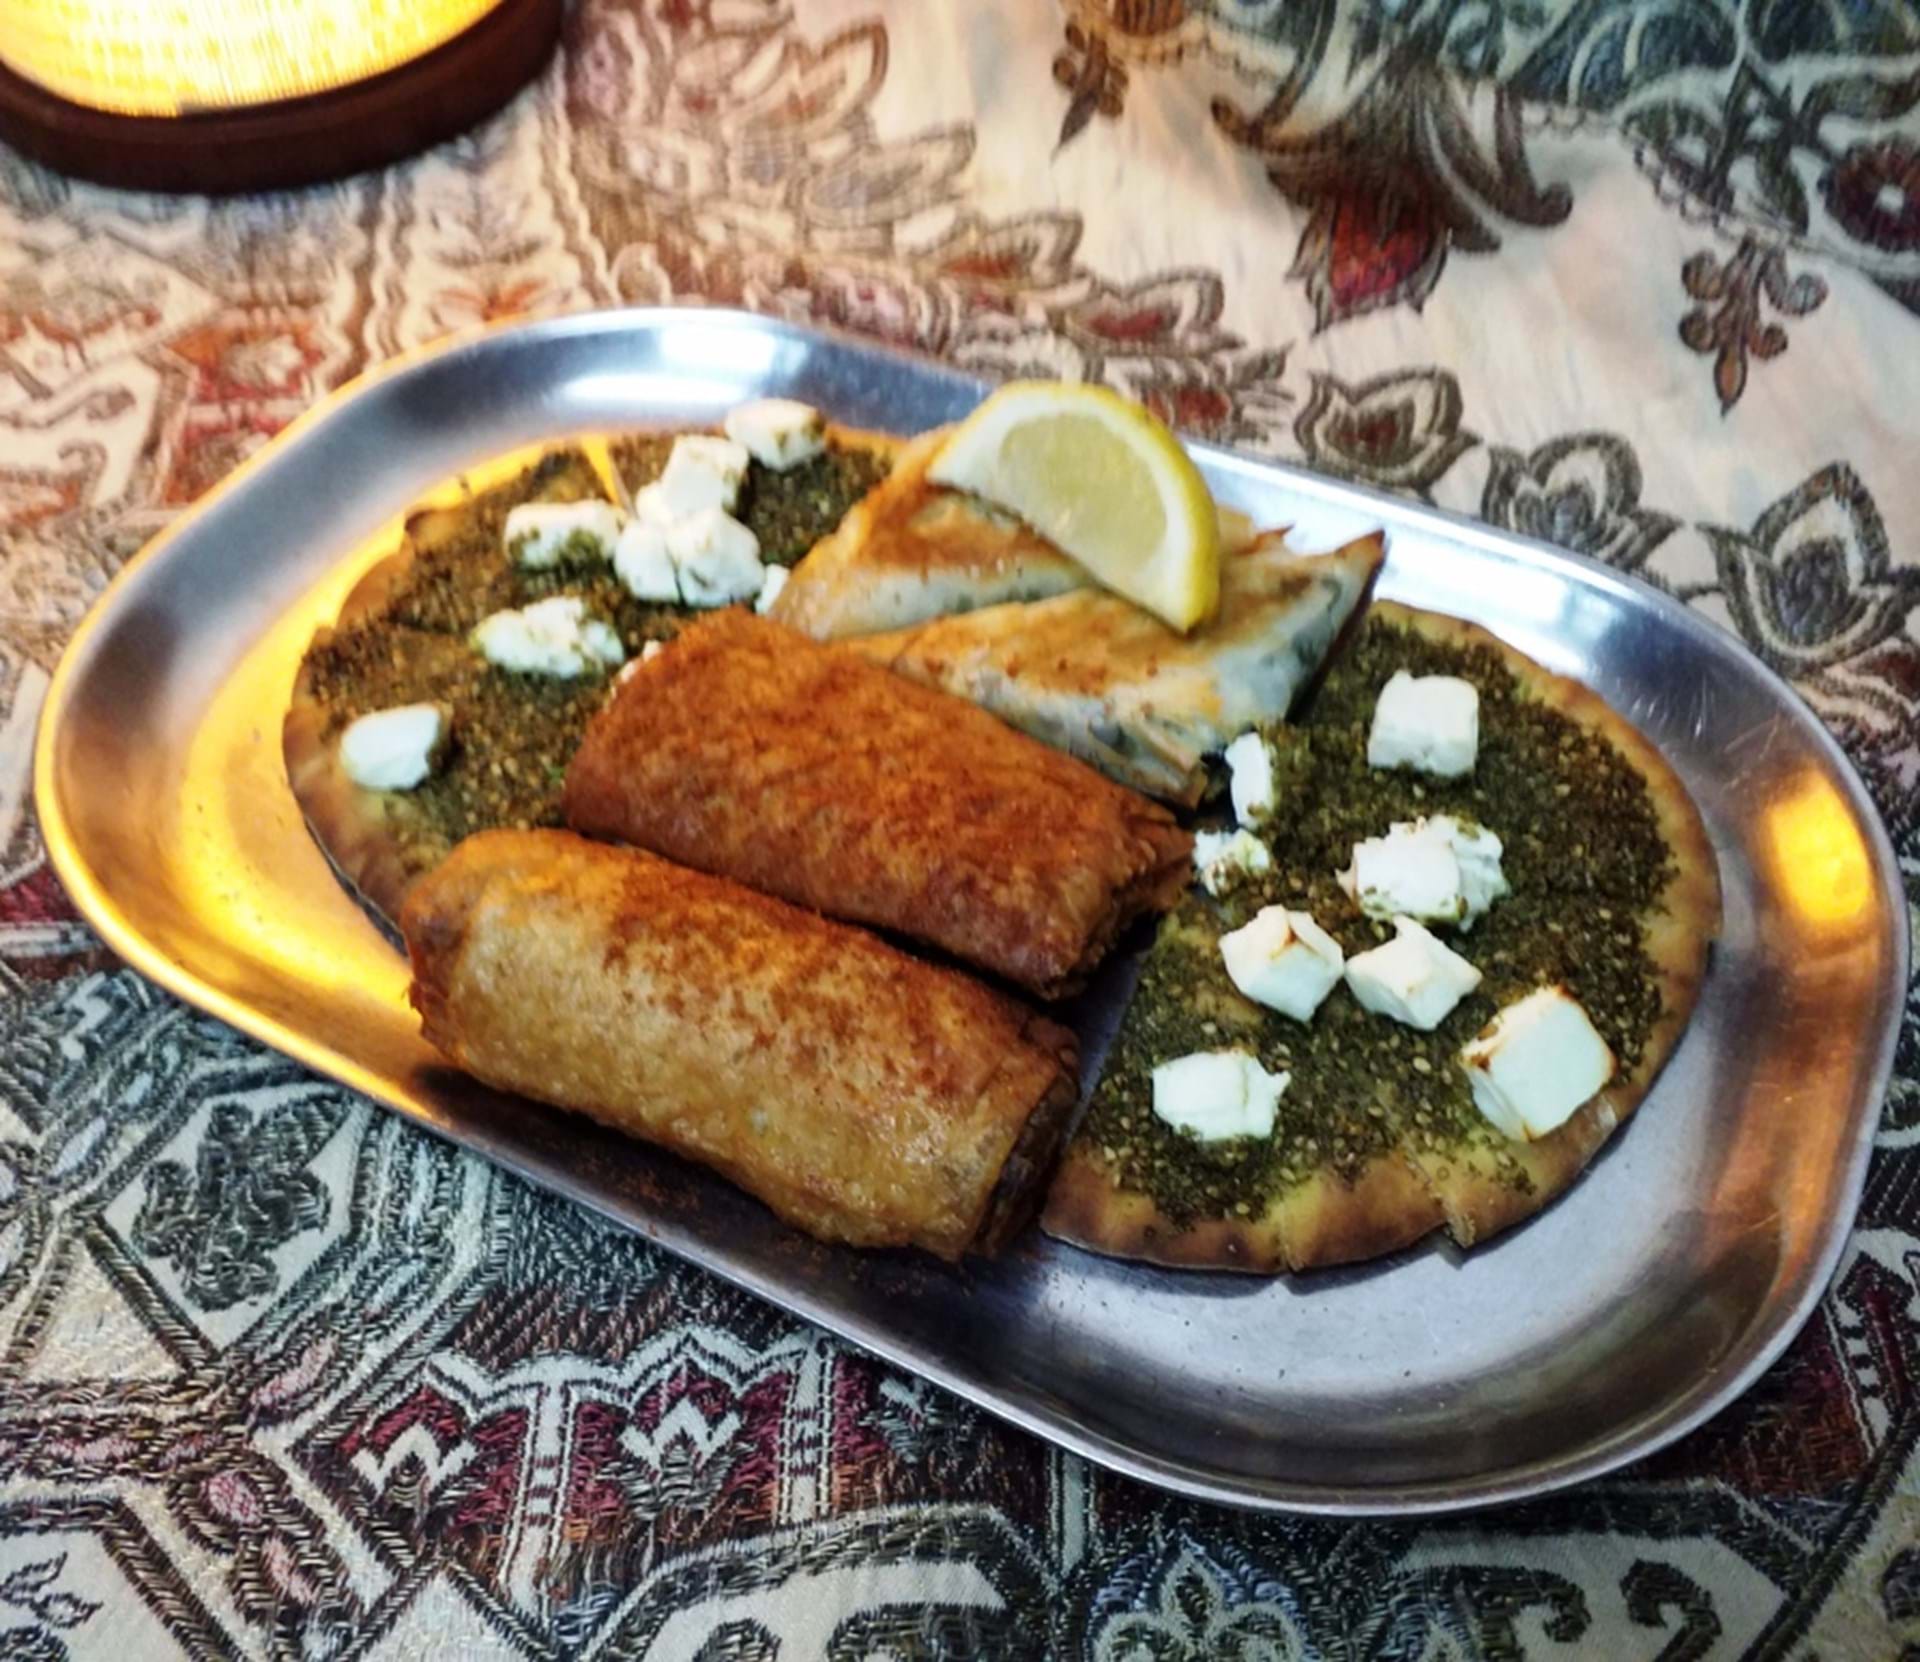 The Algerian Combo offers a selection of Algerian appetizers.